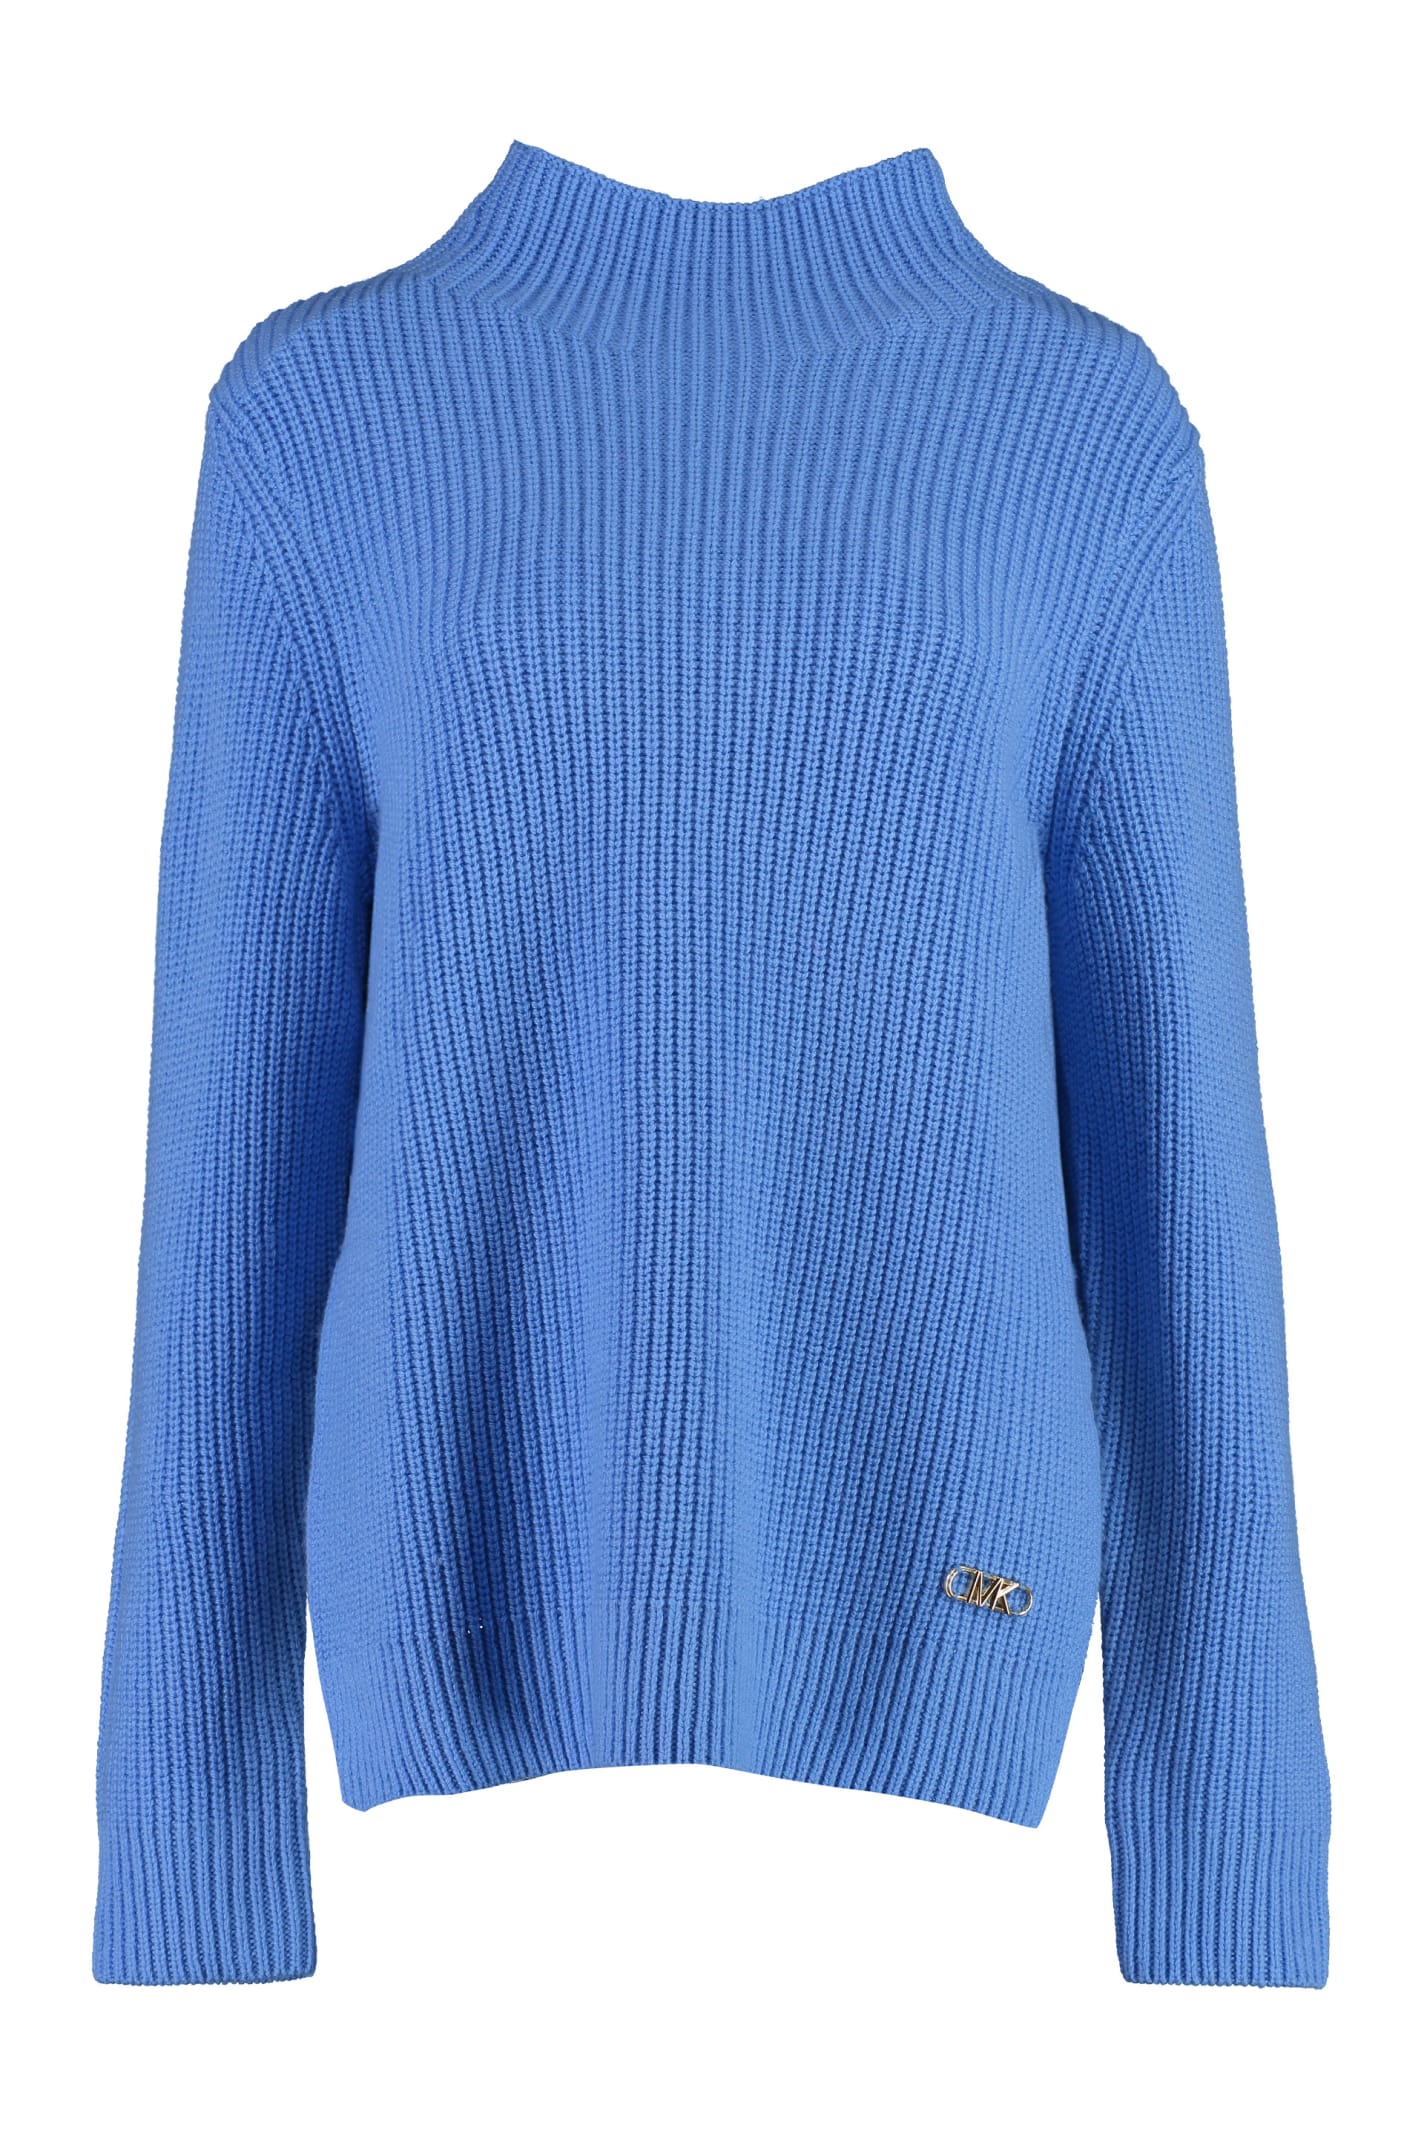 MICHAEL KORS WOOL AND CASHMERE SWEATER